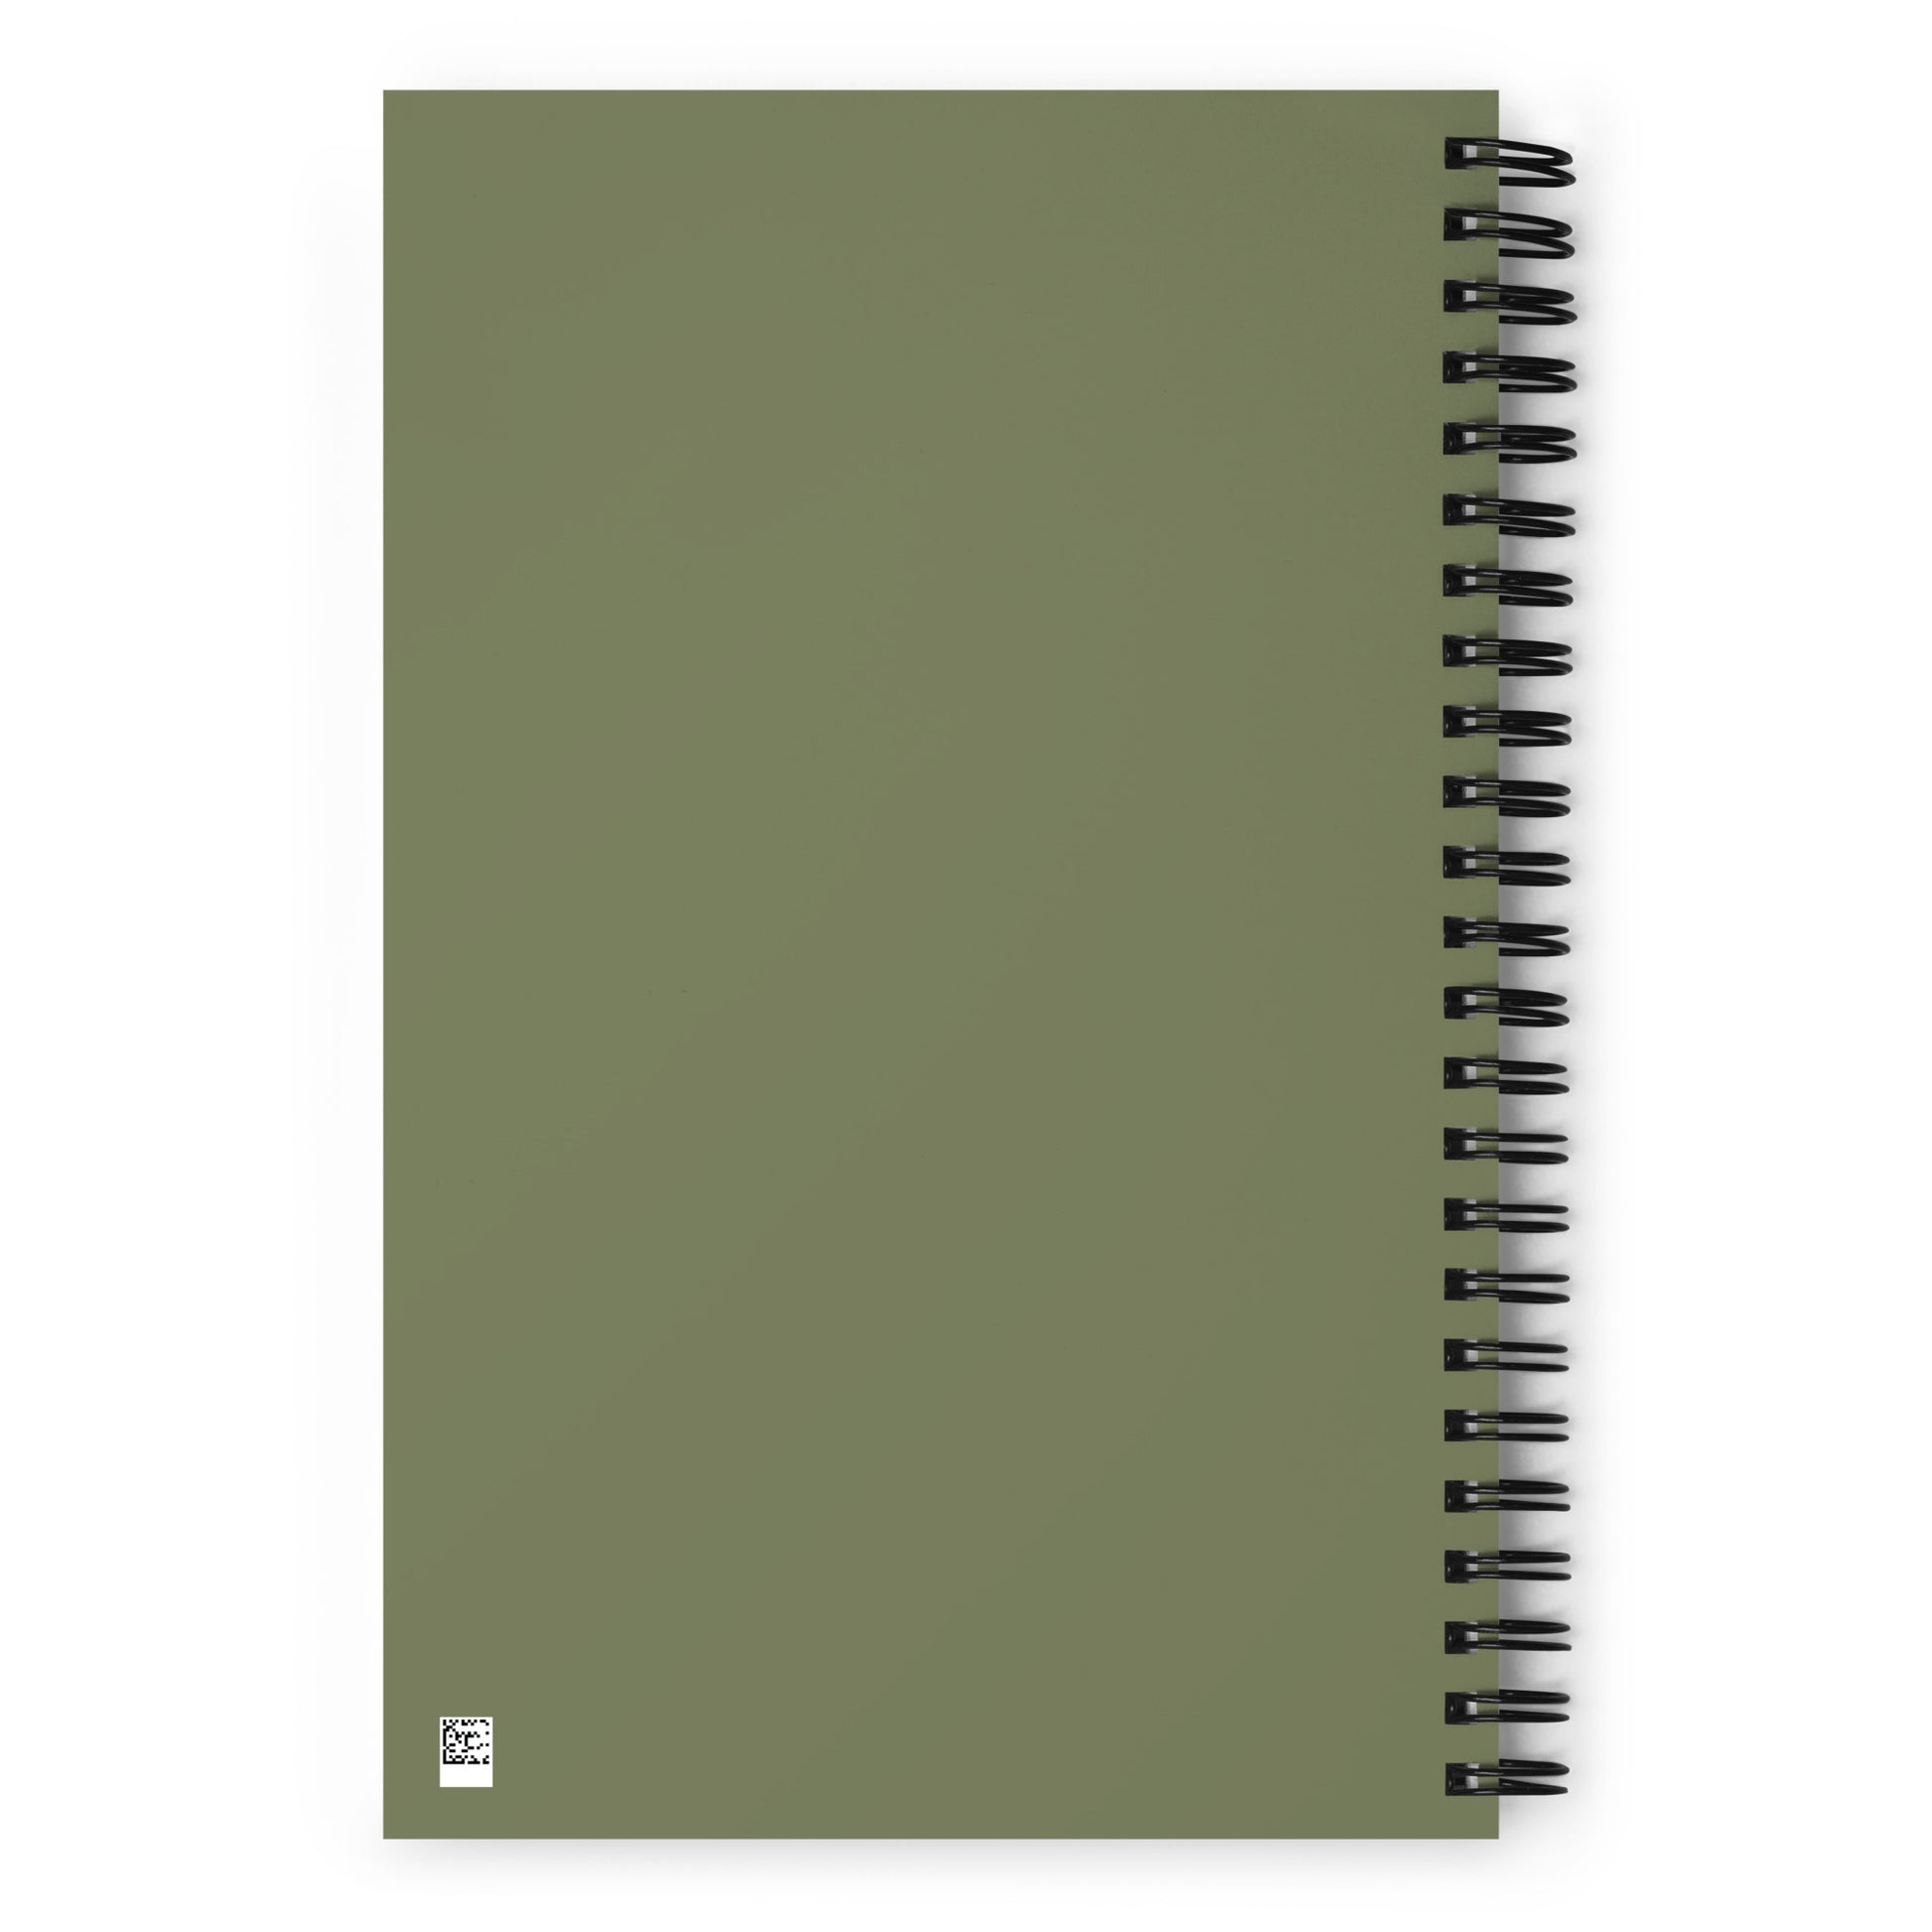 The back side of an olive green notebook bound with black o-ring wires.